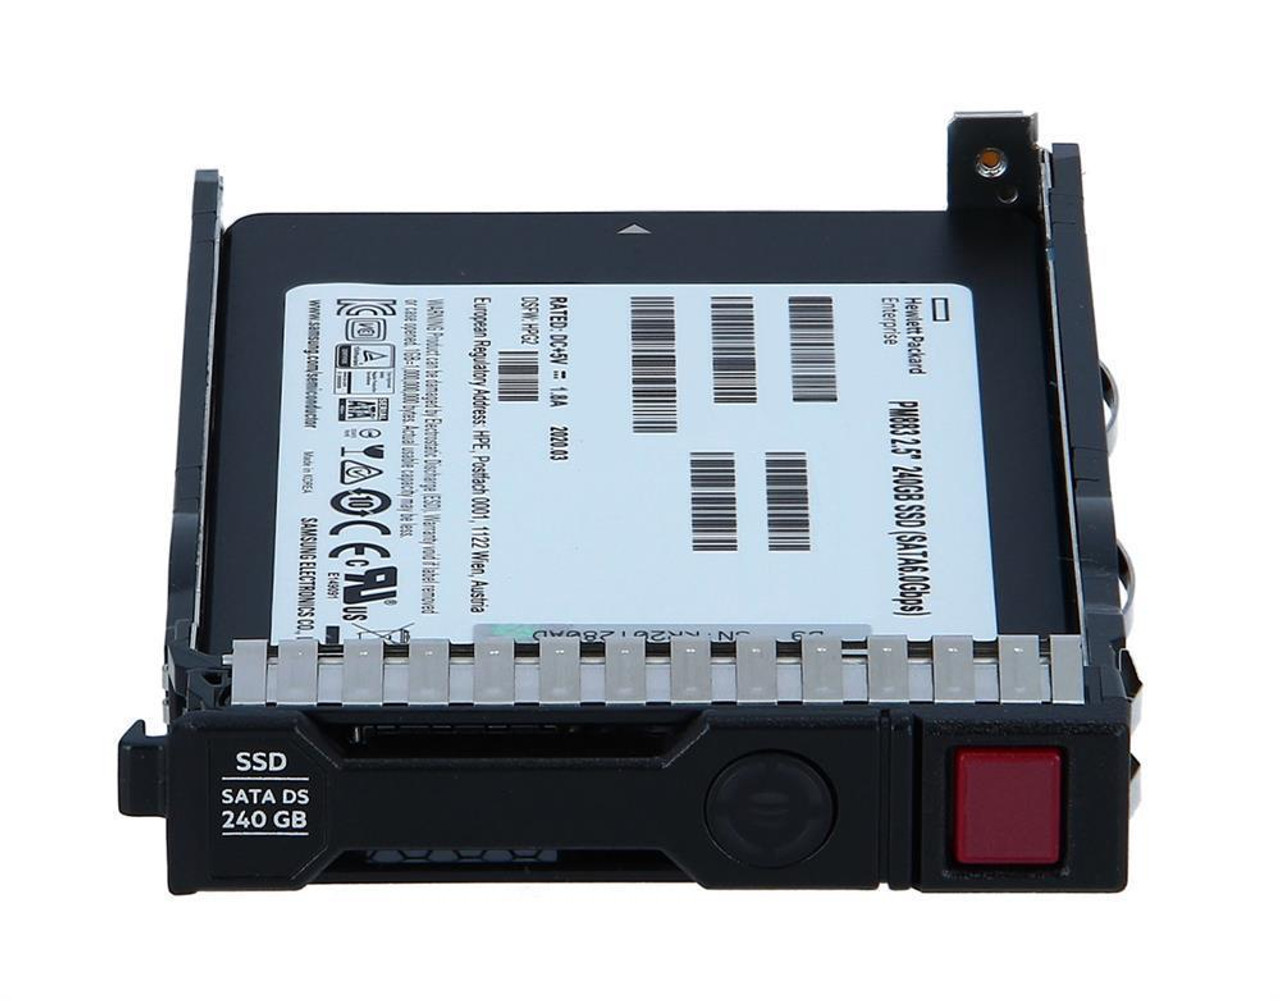 P06607-H21#0D1 HPE 480GB (2 x 240GB) MLC SATA 6Gbps Mixed Use 2.5-inch Internal Solid State Drive (SSD) with Smart Carrier M.2 SCM Enablement Kit